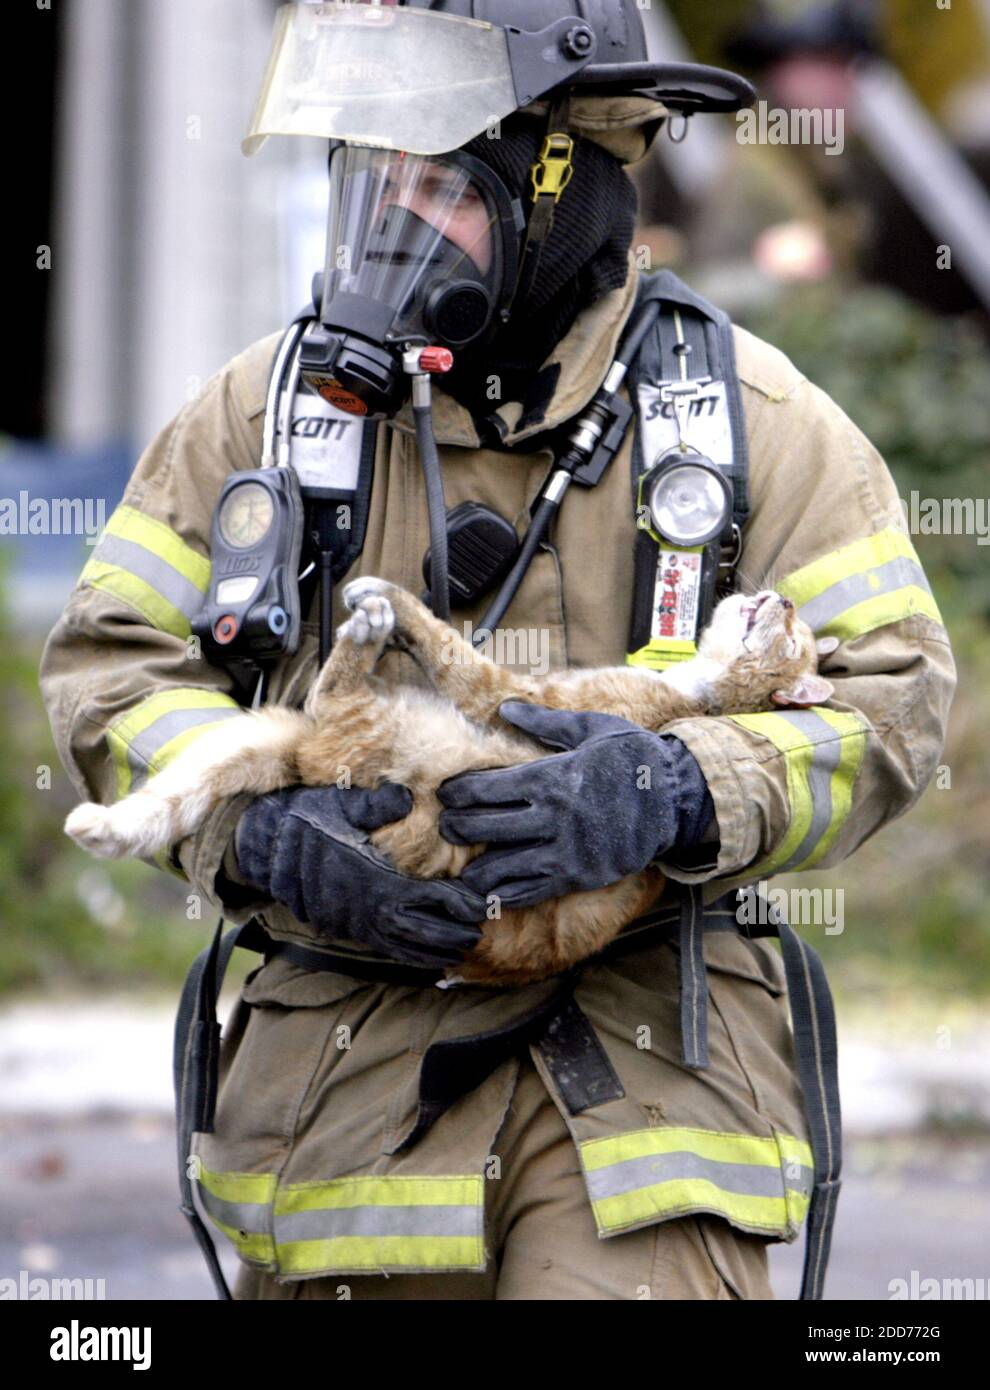 https://c8.alamy.com/comp/2DD772G/no-film-no-video-no-tv-no-documentary-boise-firefighter-dana-brown-carries-a-cat-from-an-apartment-building-that-had-caught-fire-this-is-my-first-cat-rescue-said-brown-an-11-year-veteran-of-the-department-in-boise-id-usa-on-november-9-2007-photo-by-chris-buleridaho-statesmanmctabacapresscom-2DD772G.jpg